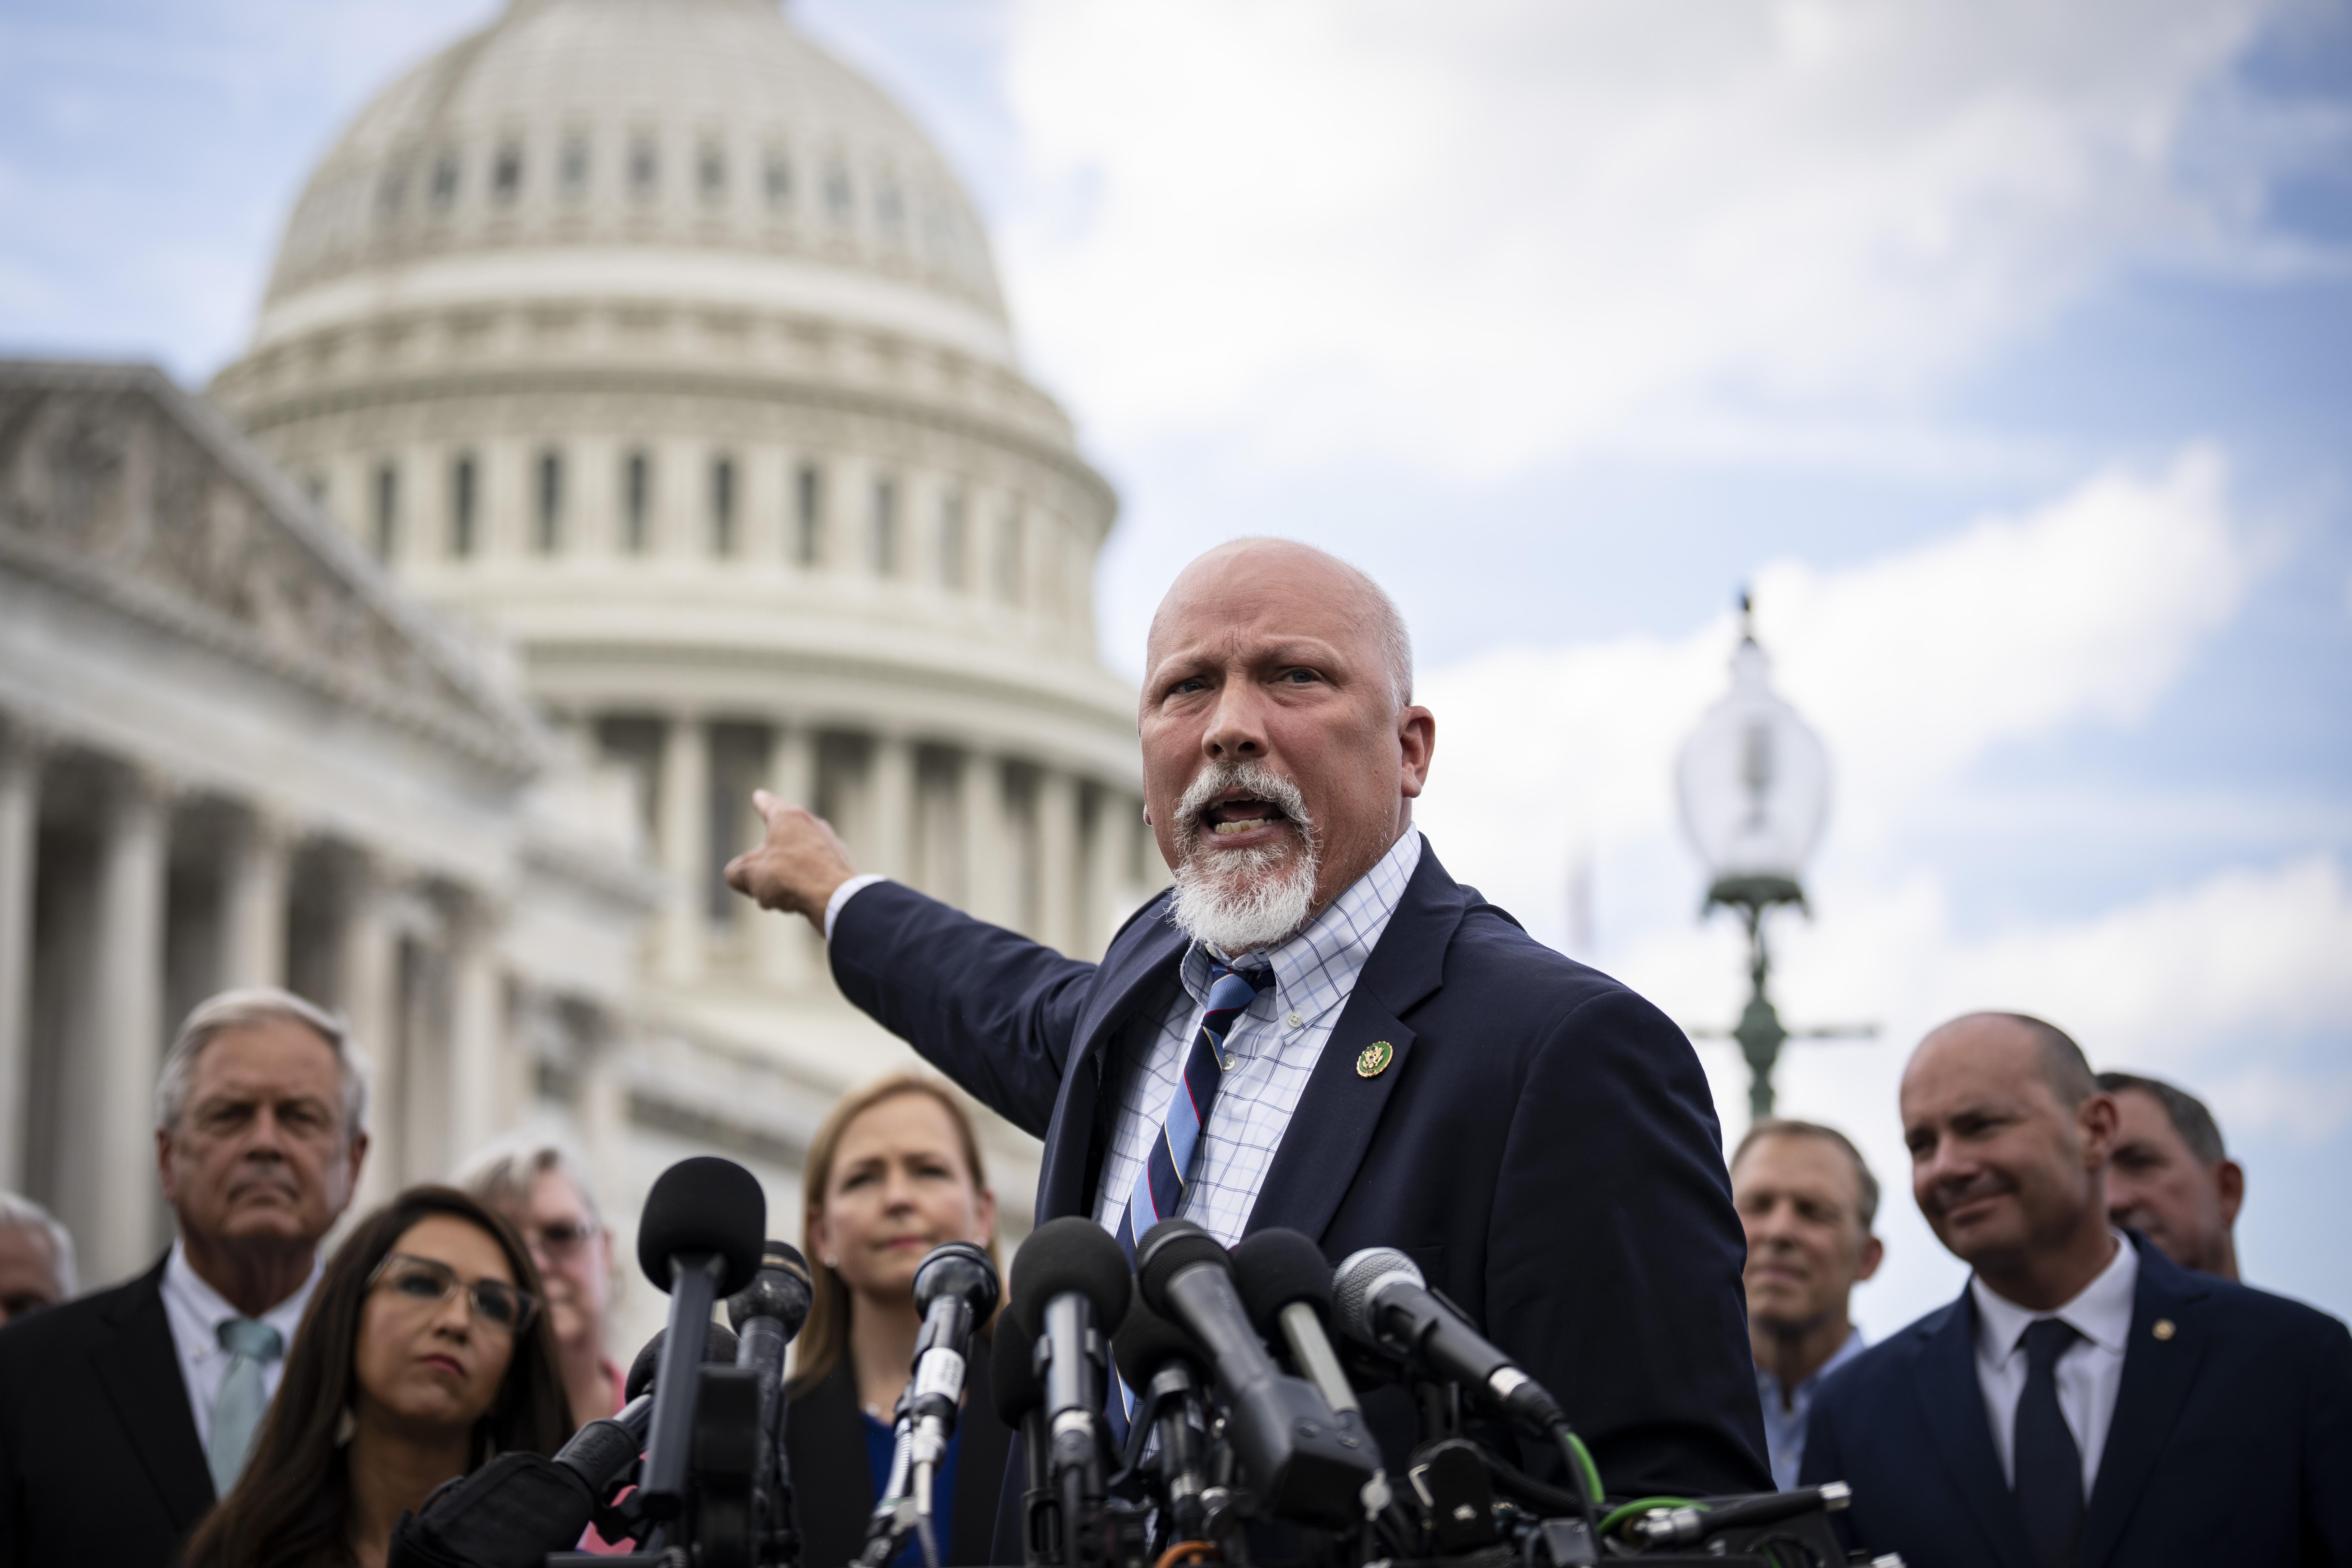 Texas Rep. Chip Roy at a news conference with members of the House Freedom Caucus outside the U.S. Capitol.